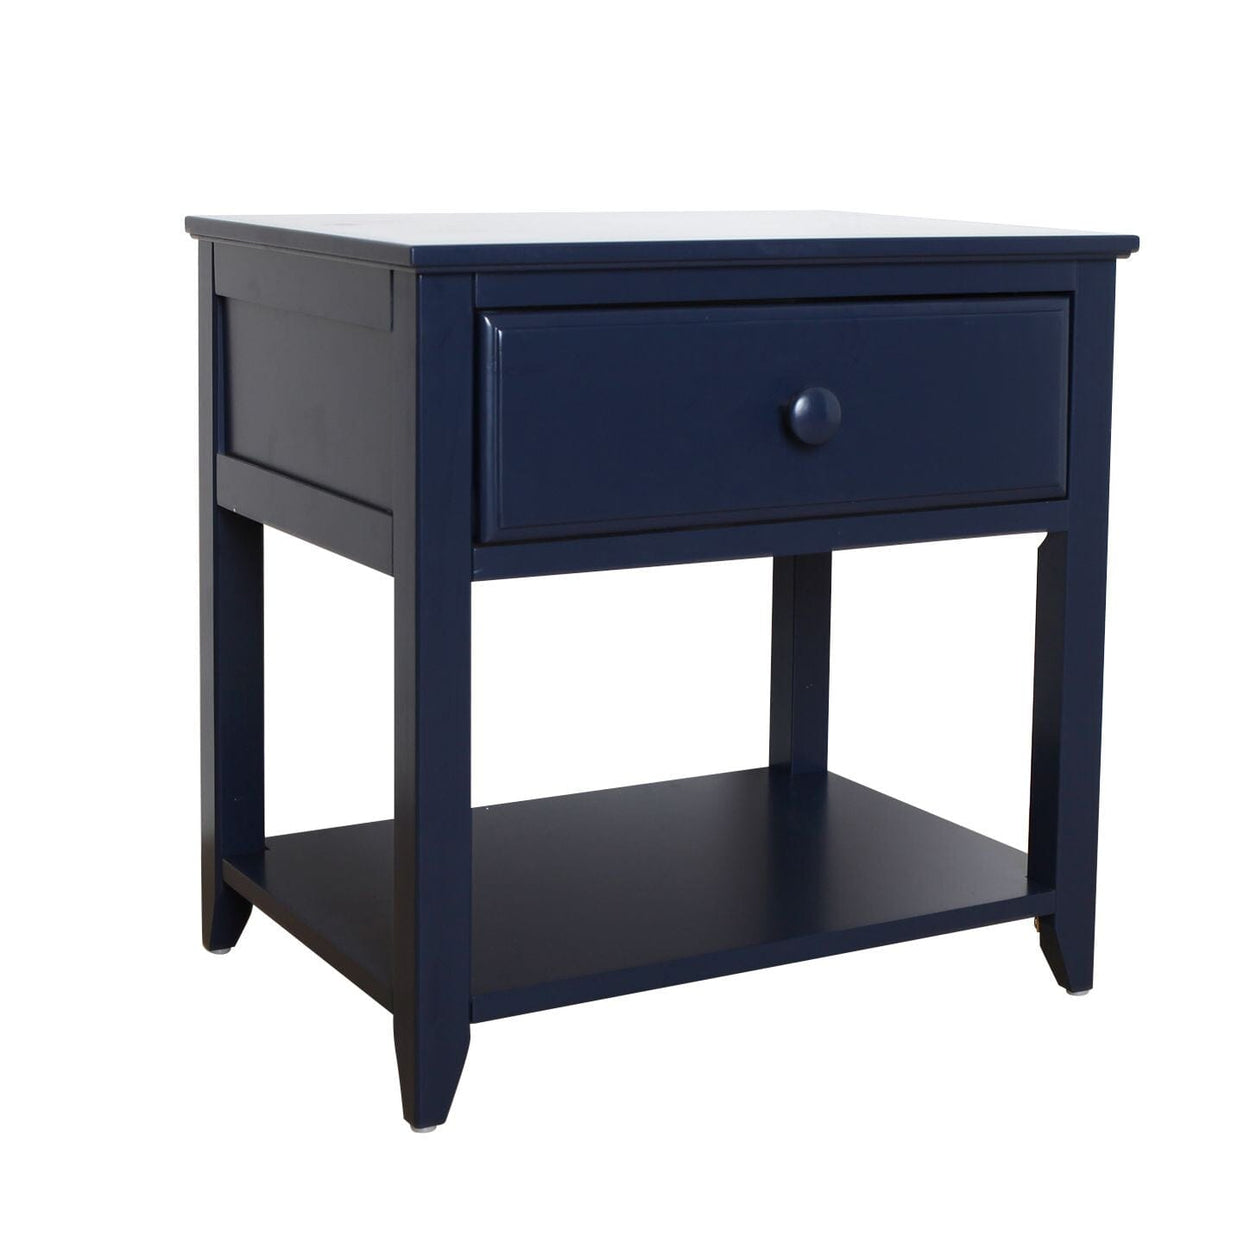 180001-131 : Furniture Nightstand with Drawer and Shelf, Blue